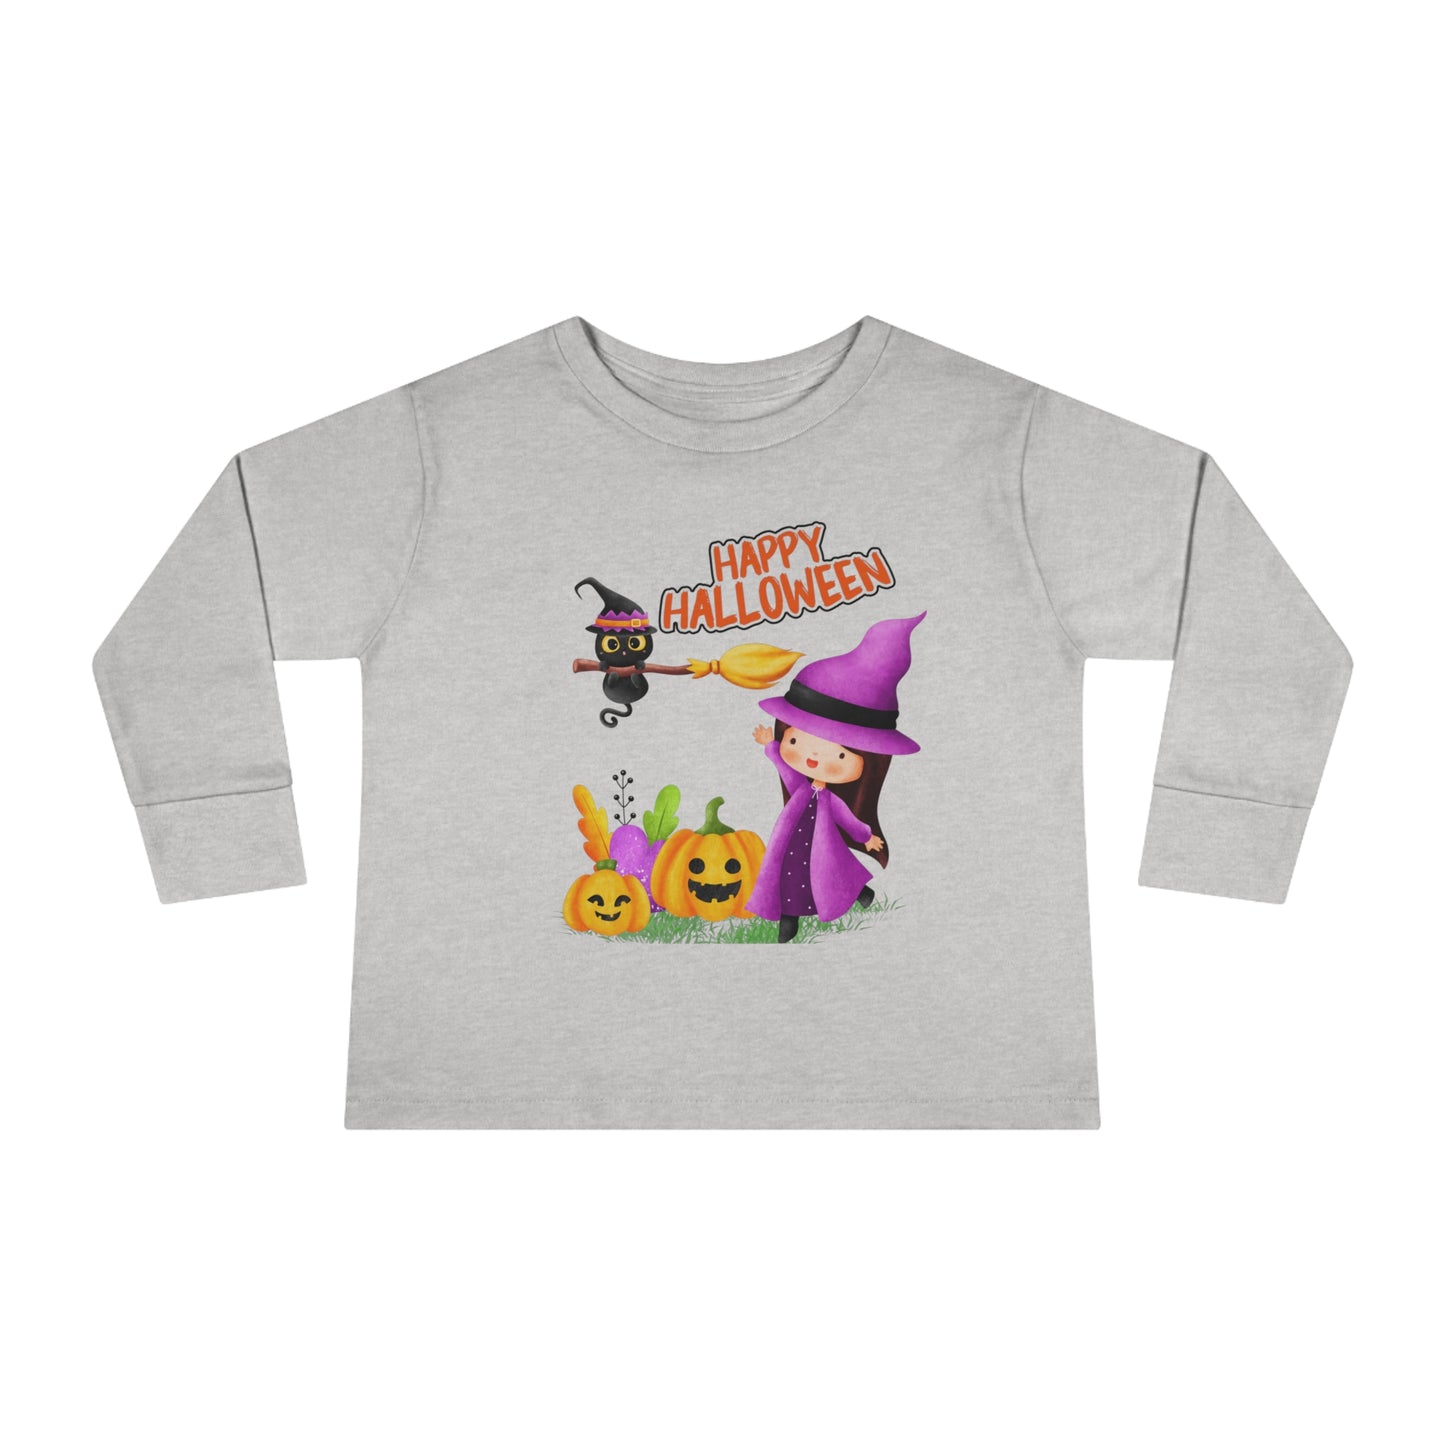 Toddler Long Sleeve Tee - Halloween - Young witch - 02